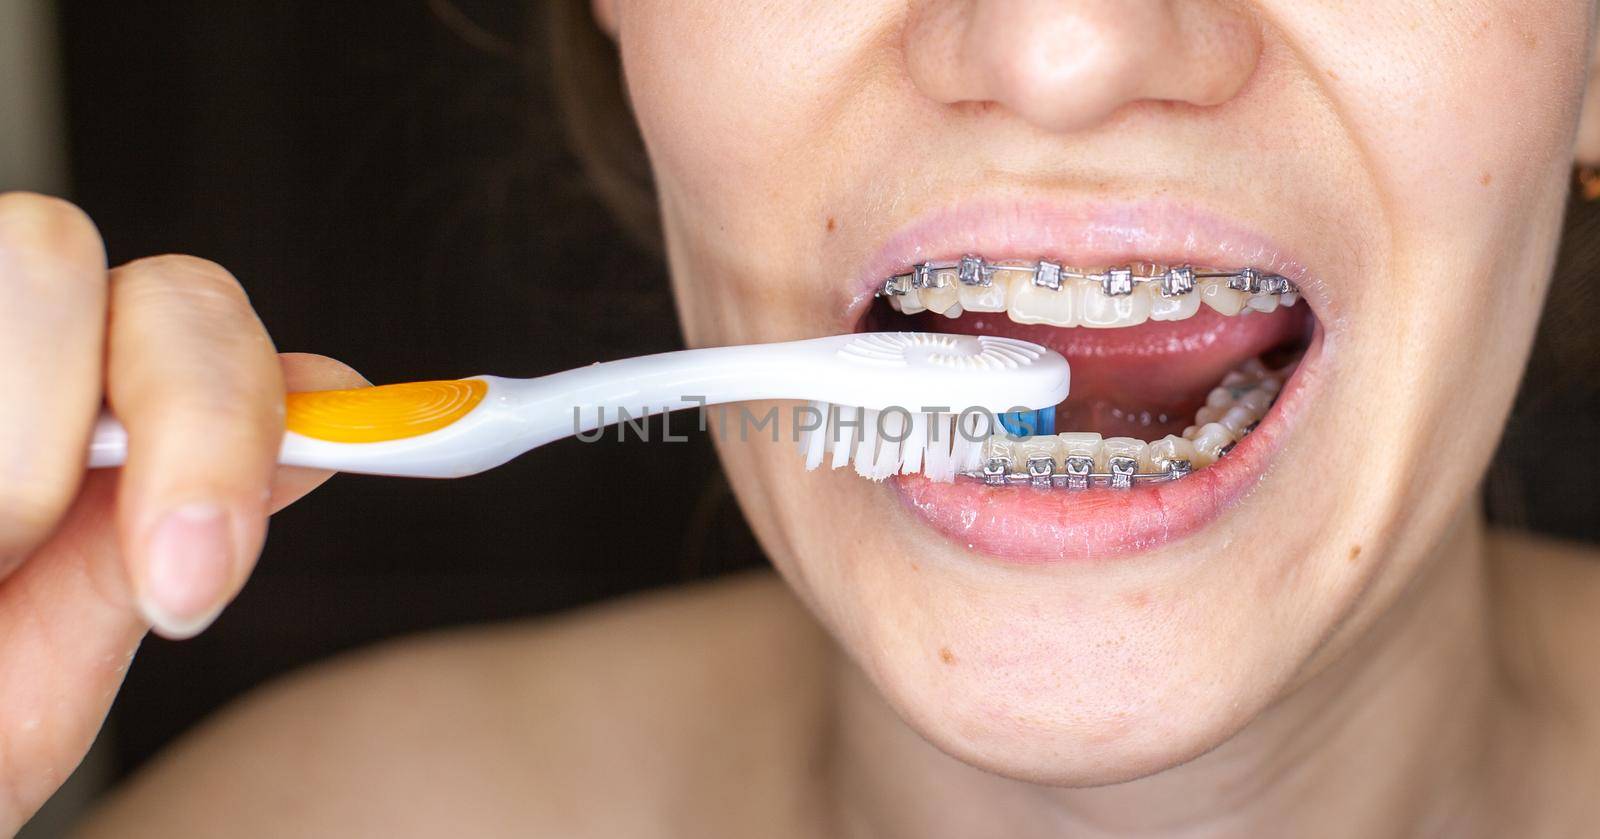 Girl with braces on her teeth brushing her teeth with a toothbrush by AnatoliiFoto